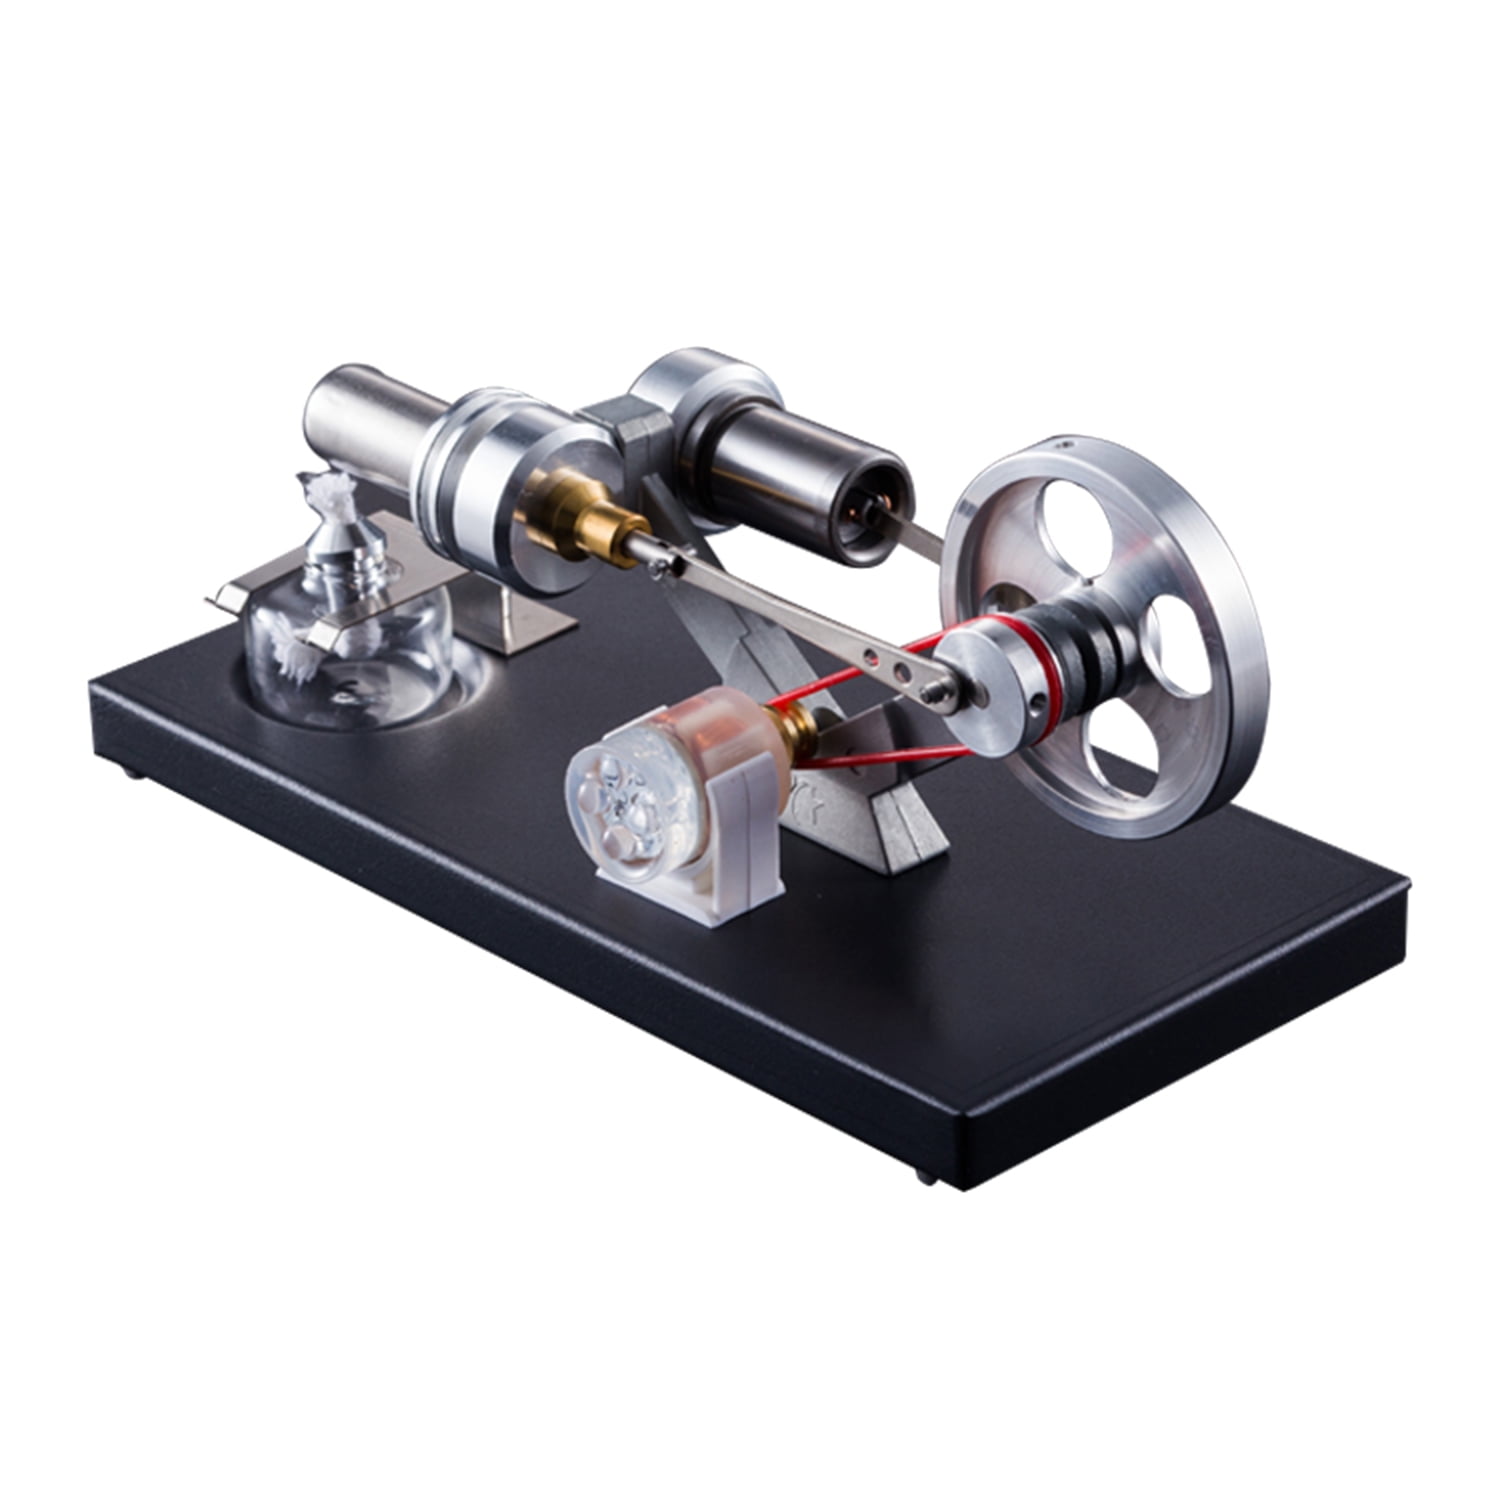 Double Cylinder Hot Air Stirling Engine Motor Power Generator Model Physics Kit 